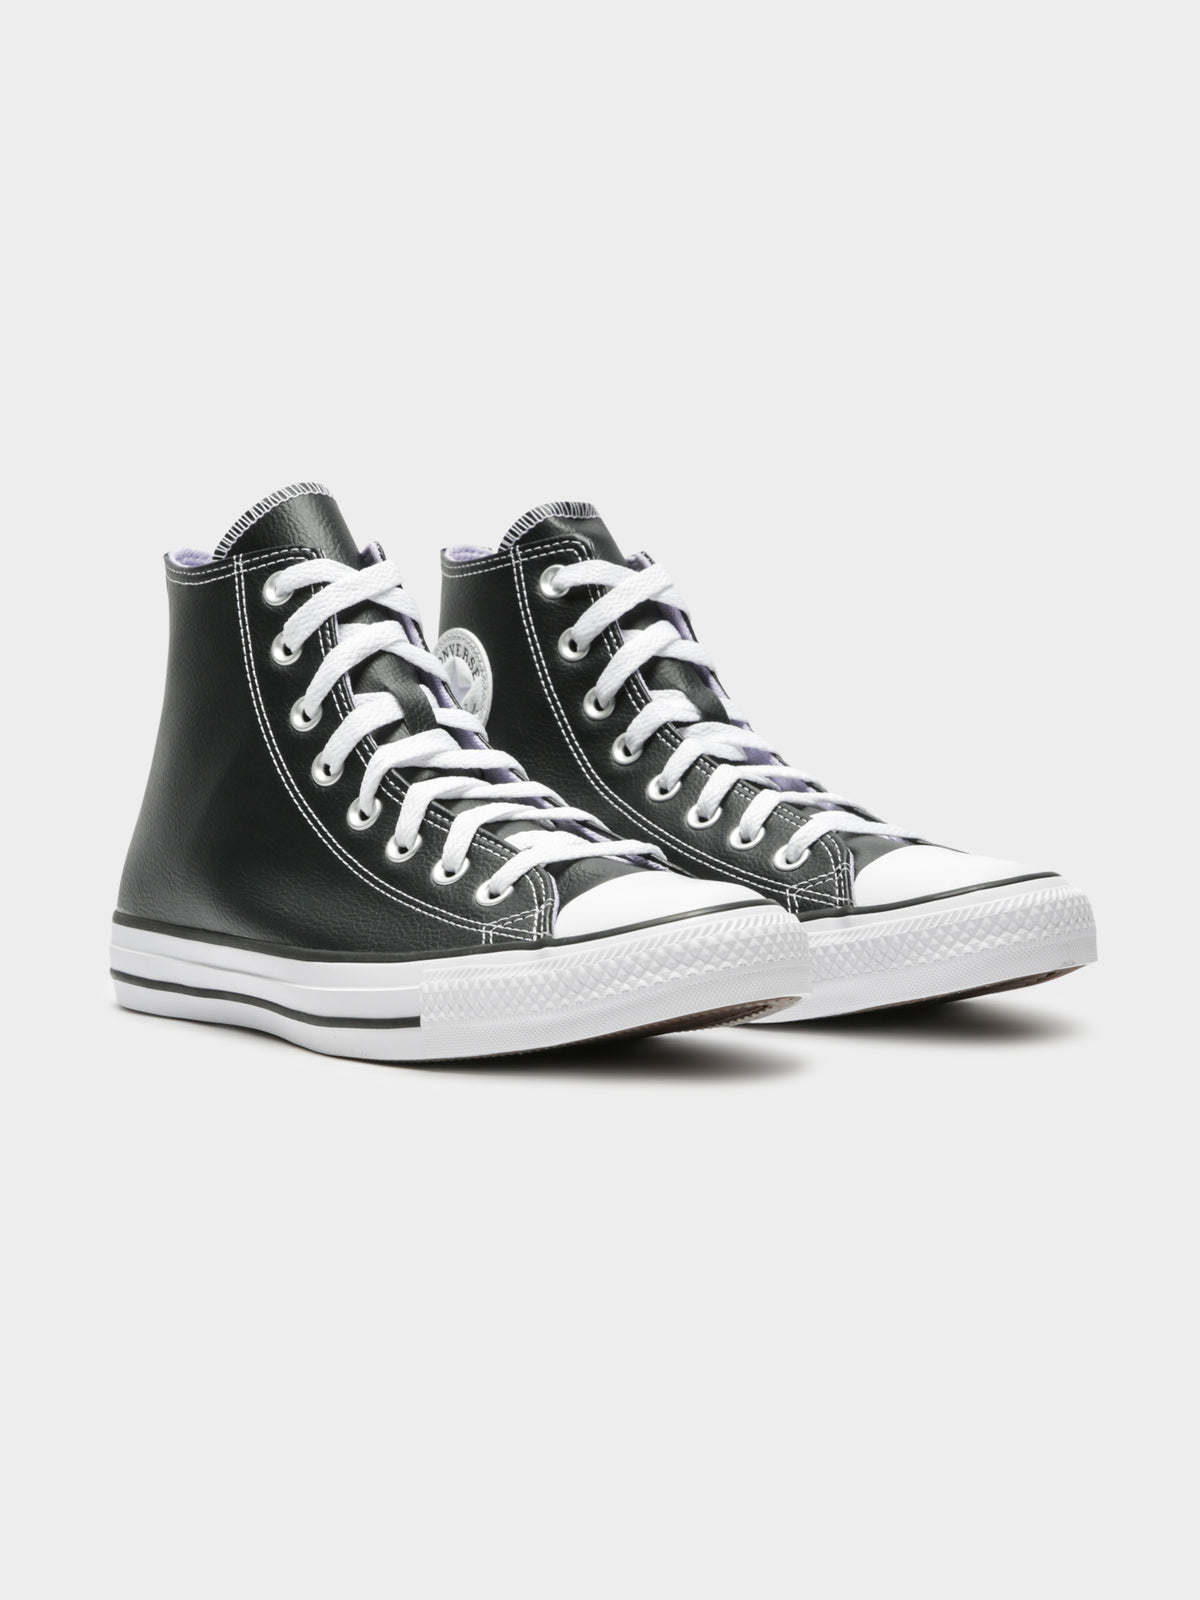 Unisex Chuck Taylor Hi All Star Leather Sneakers in Black &amp; Purple